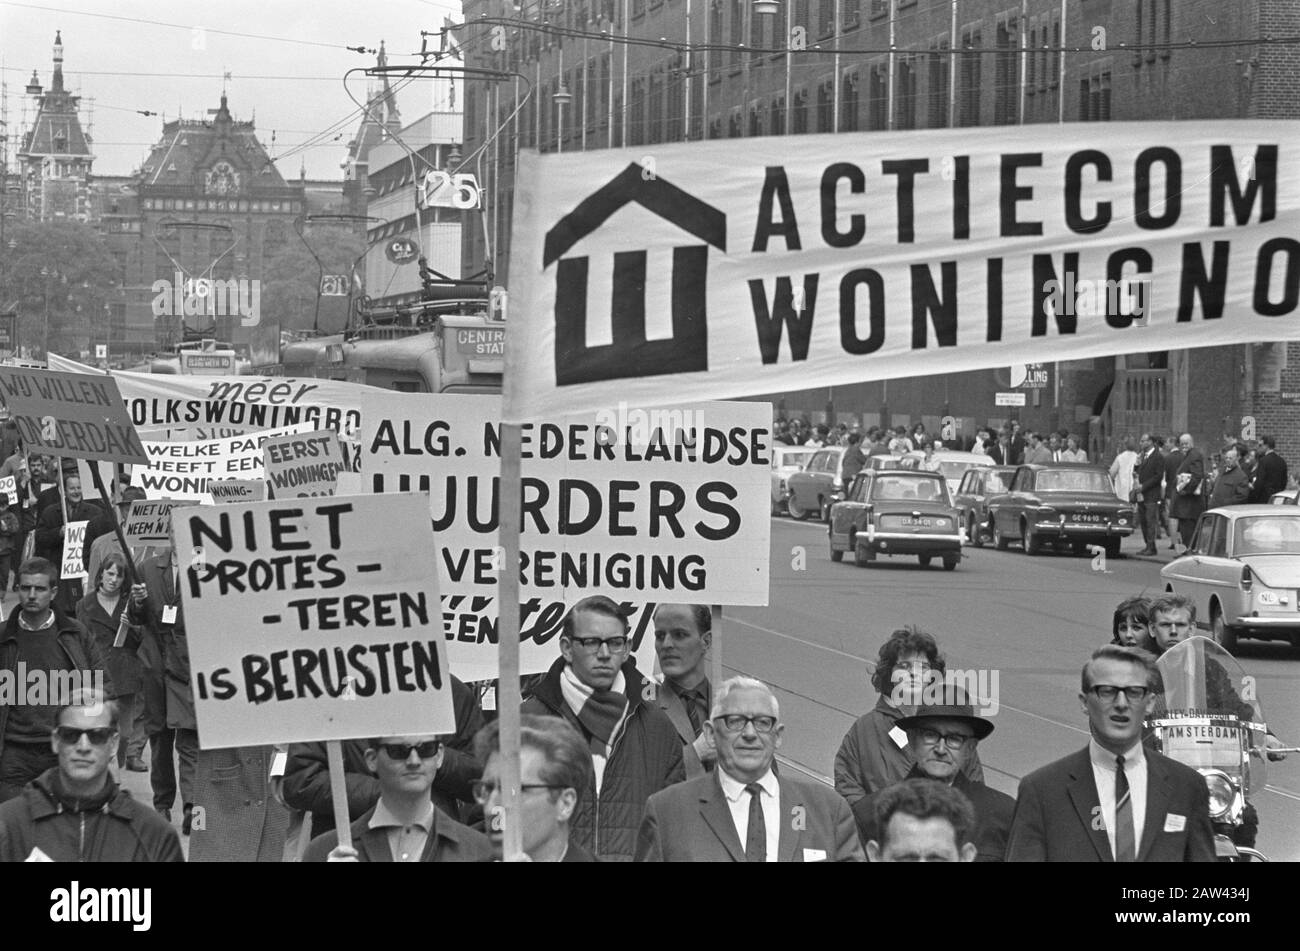 Protest march through capital because of housing shortage Date: May 7, 1966 Location: Amsterdam, Noord-Holland Keywords: protest marches, housing shortage Stock Photo